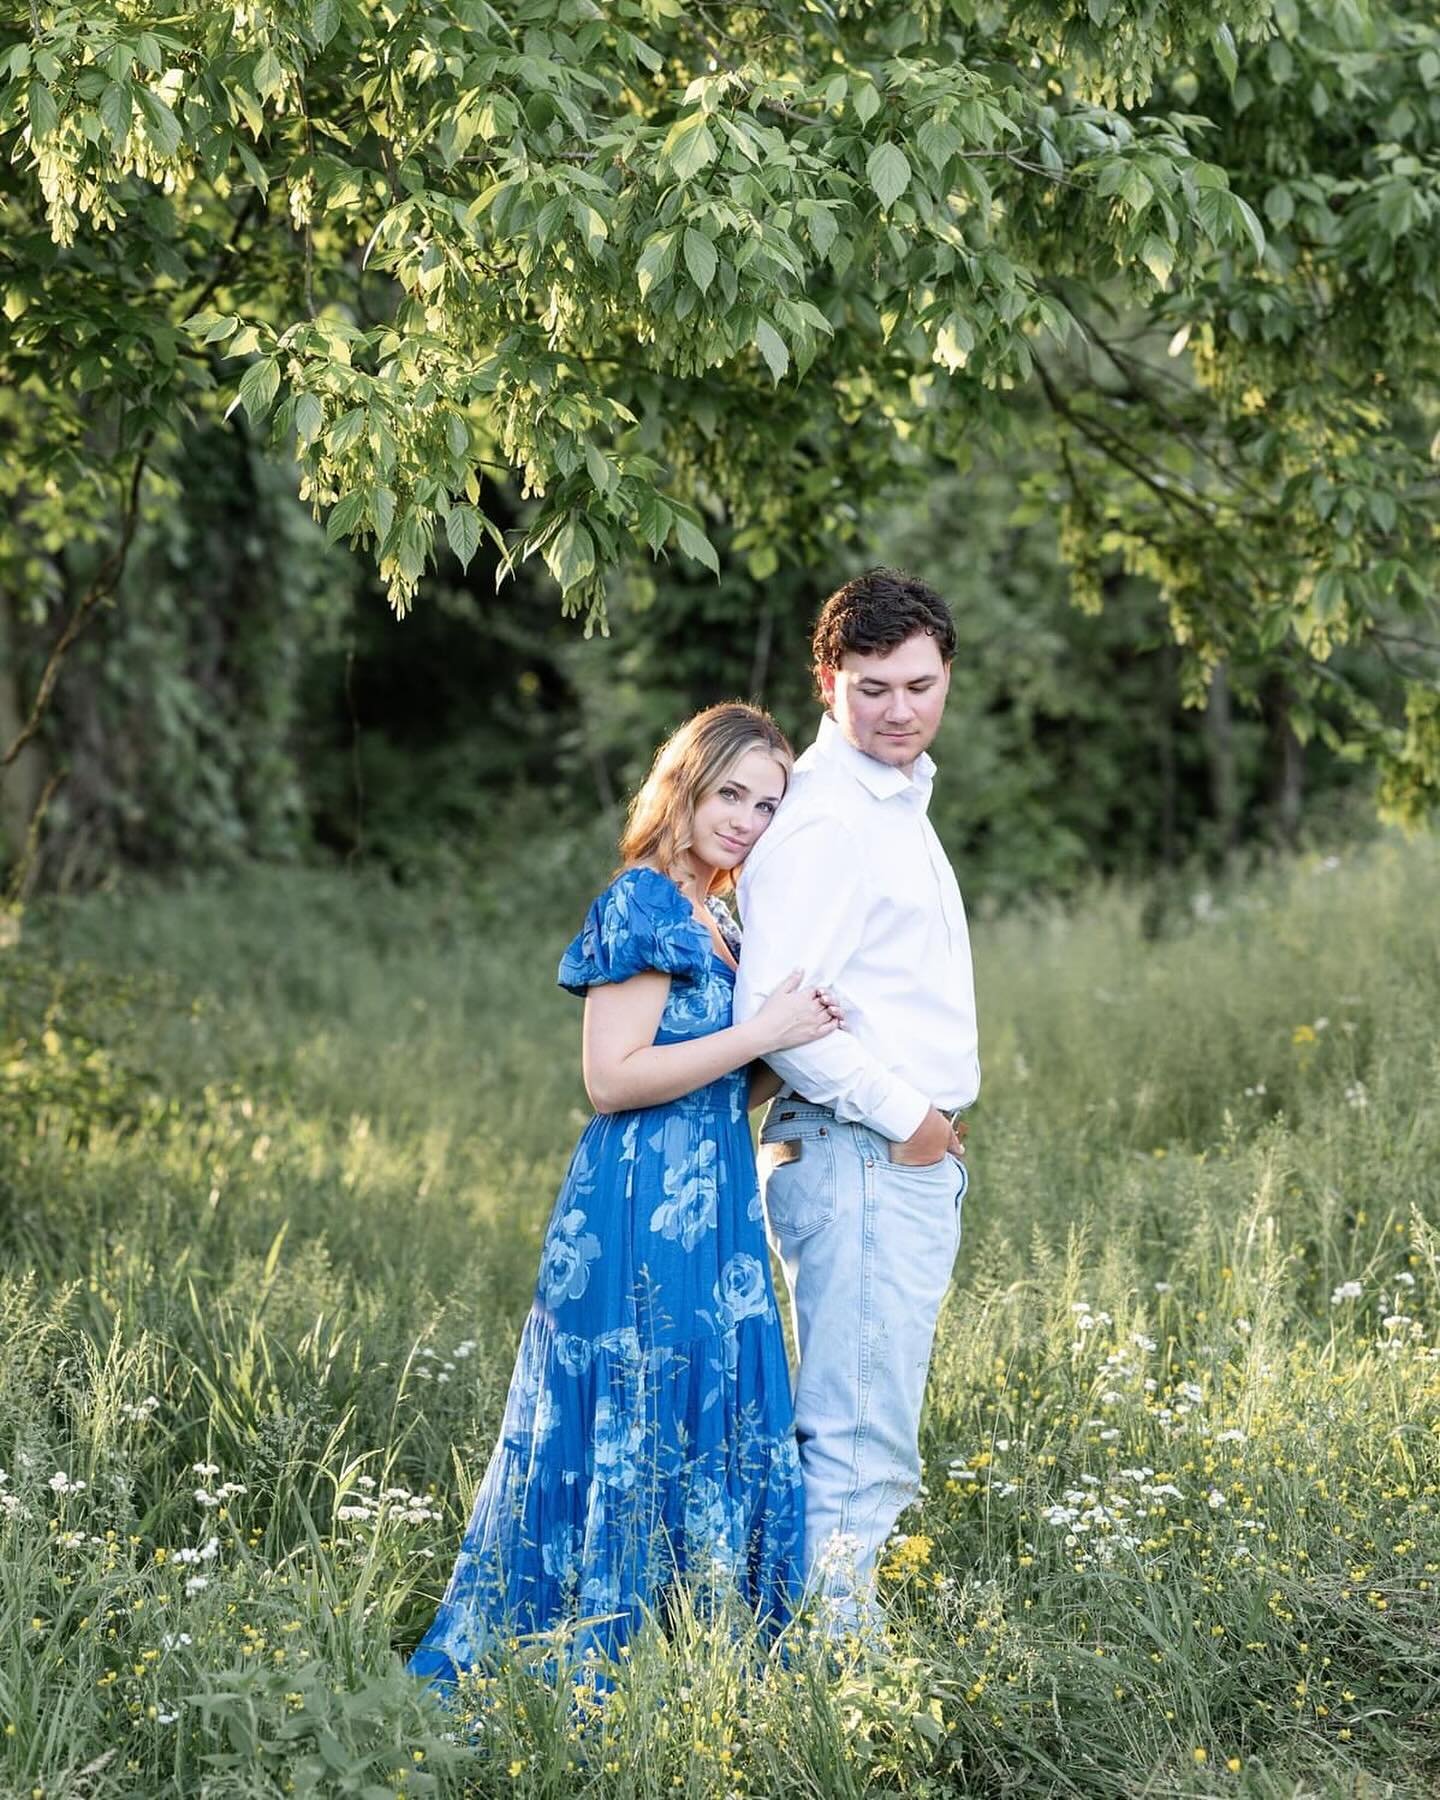 |Sneak Peeks: Rachel + Nick| I finished up my weekend sessions at Hays Nature Preserve in Huntsville, AL with Rachel + Nick.  These two are naturals in front of the camera, though I had been warned otherwise. They both have big smiles when they are w